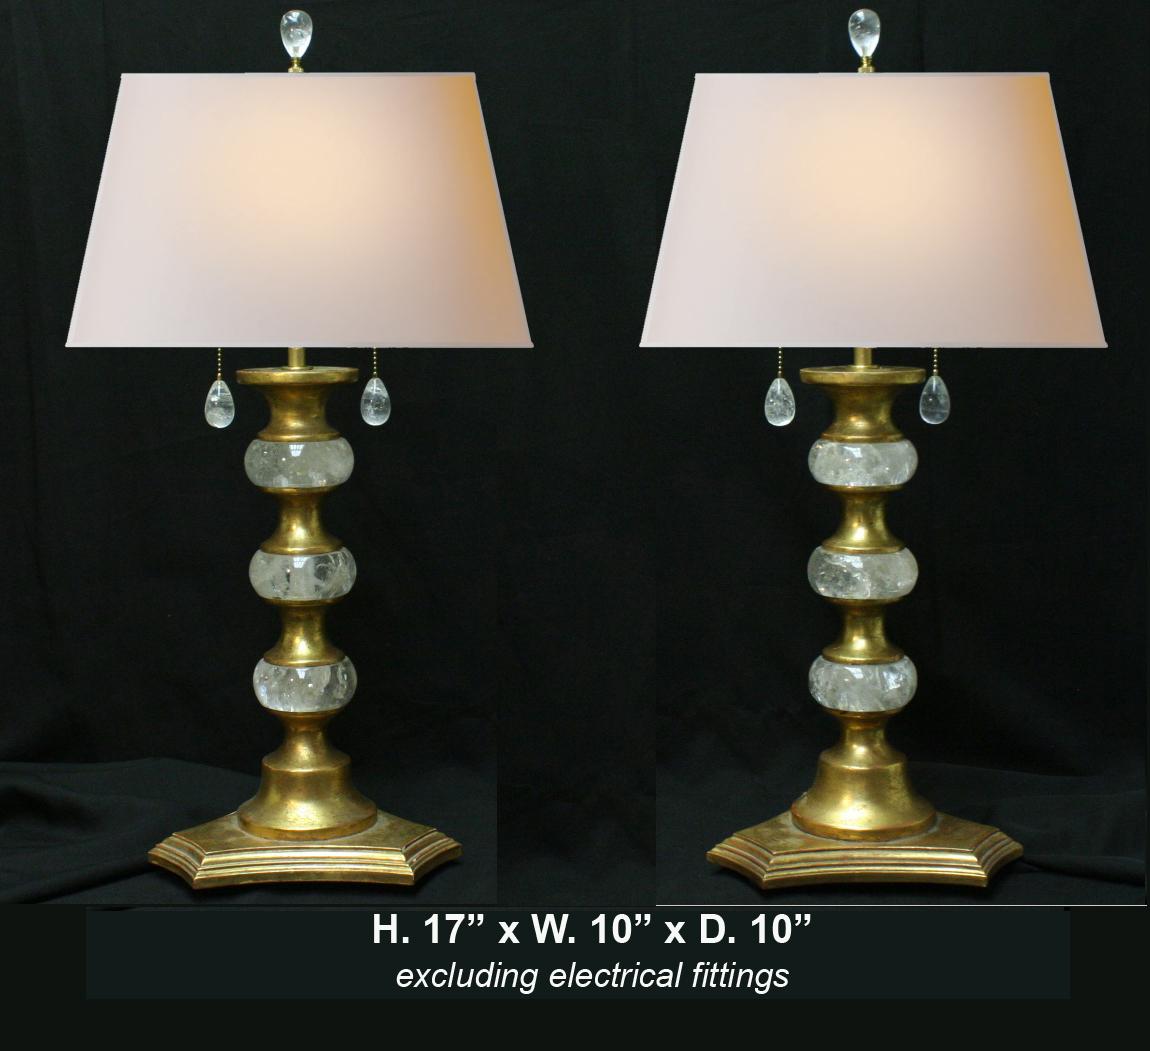 Lovely pair of modern style hand carved and hand polished rock crystal and 22-karat gold leaf giltwood table lamps with rock crystal pulls and finials.

Shades included.
         